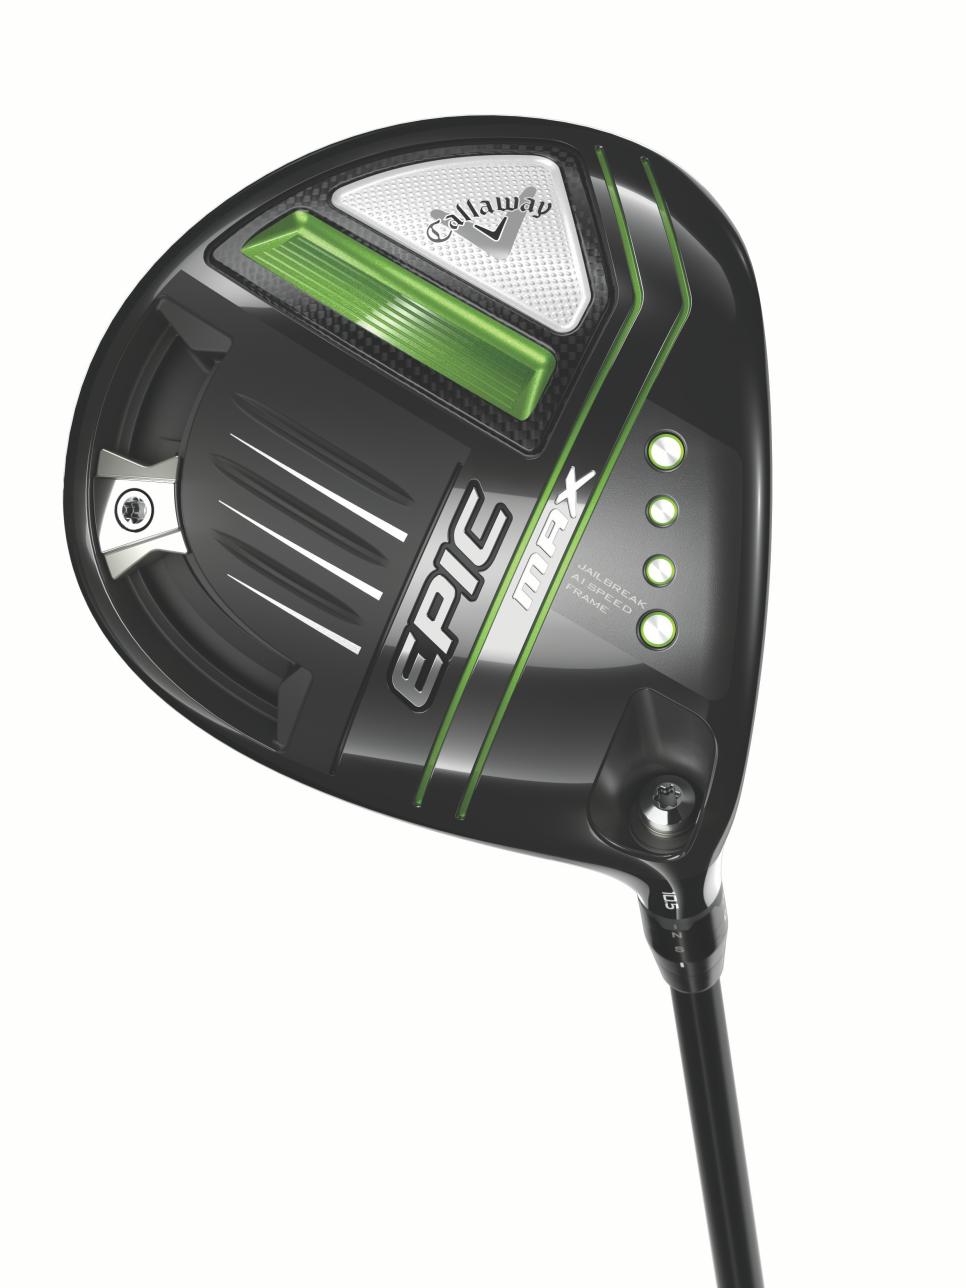 Callaway's new Epic lineup takes 